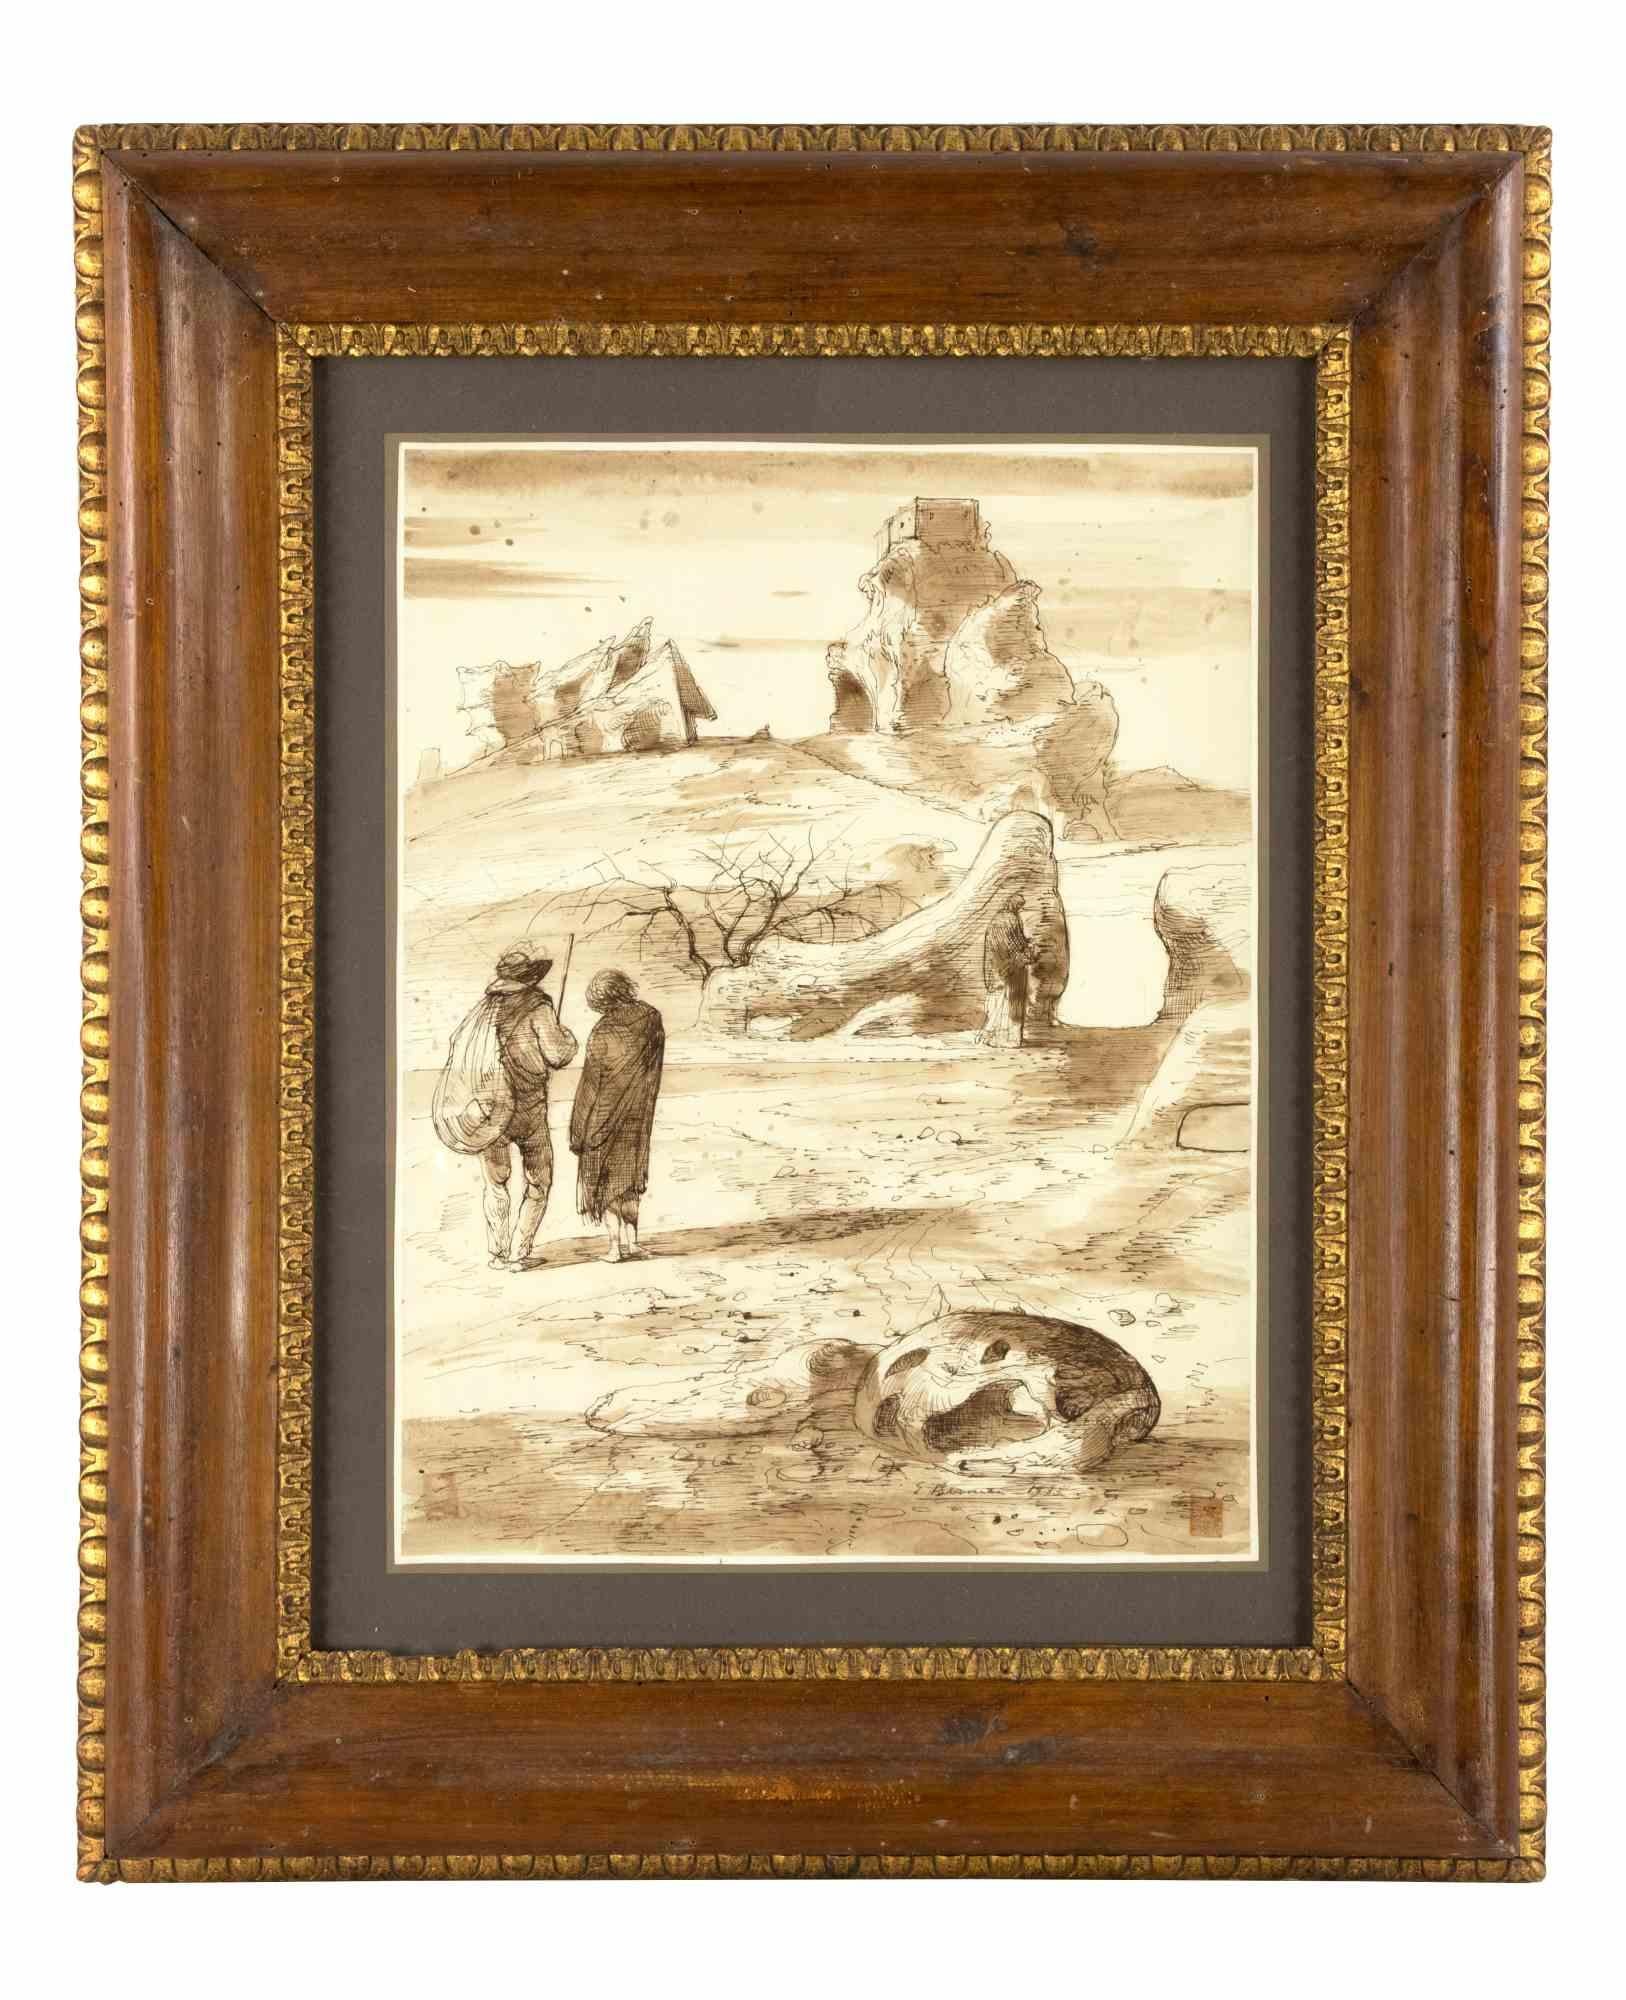 Eugene Berman Figurative Art - Landscape with Figures -  Drawing by E. Berman - Mid-20th Century